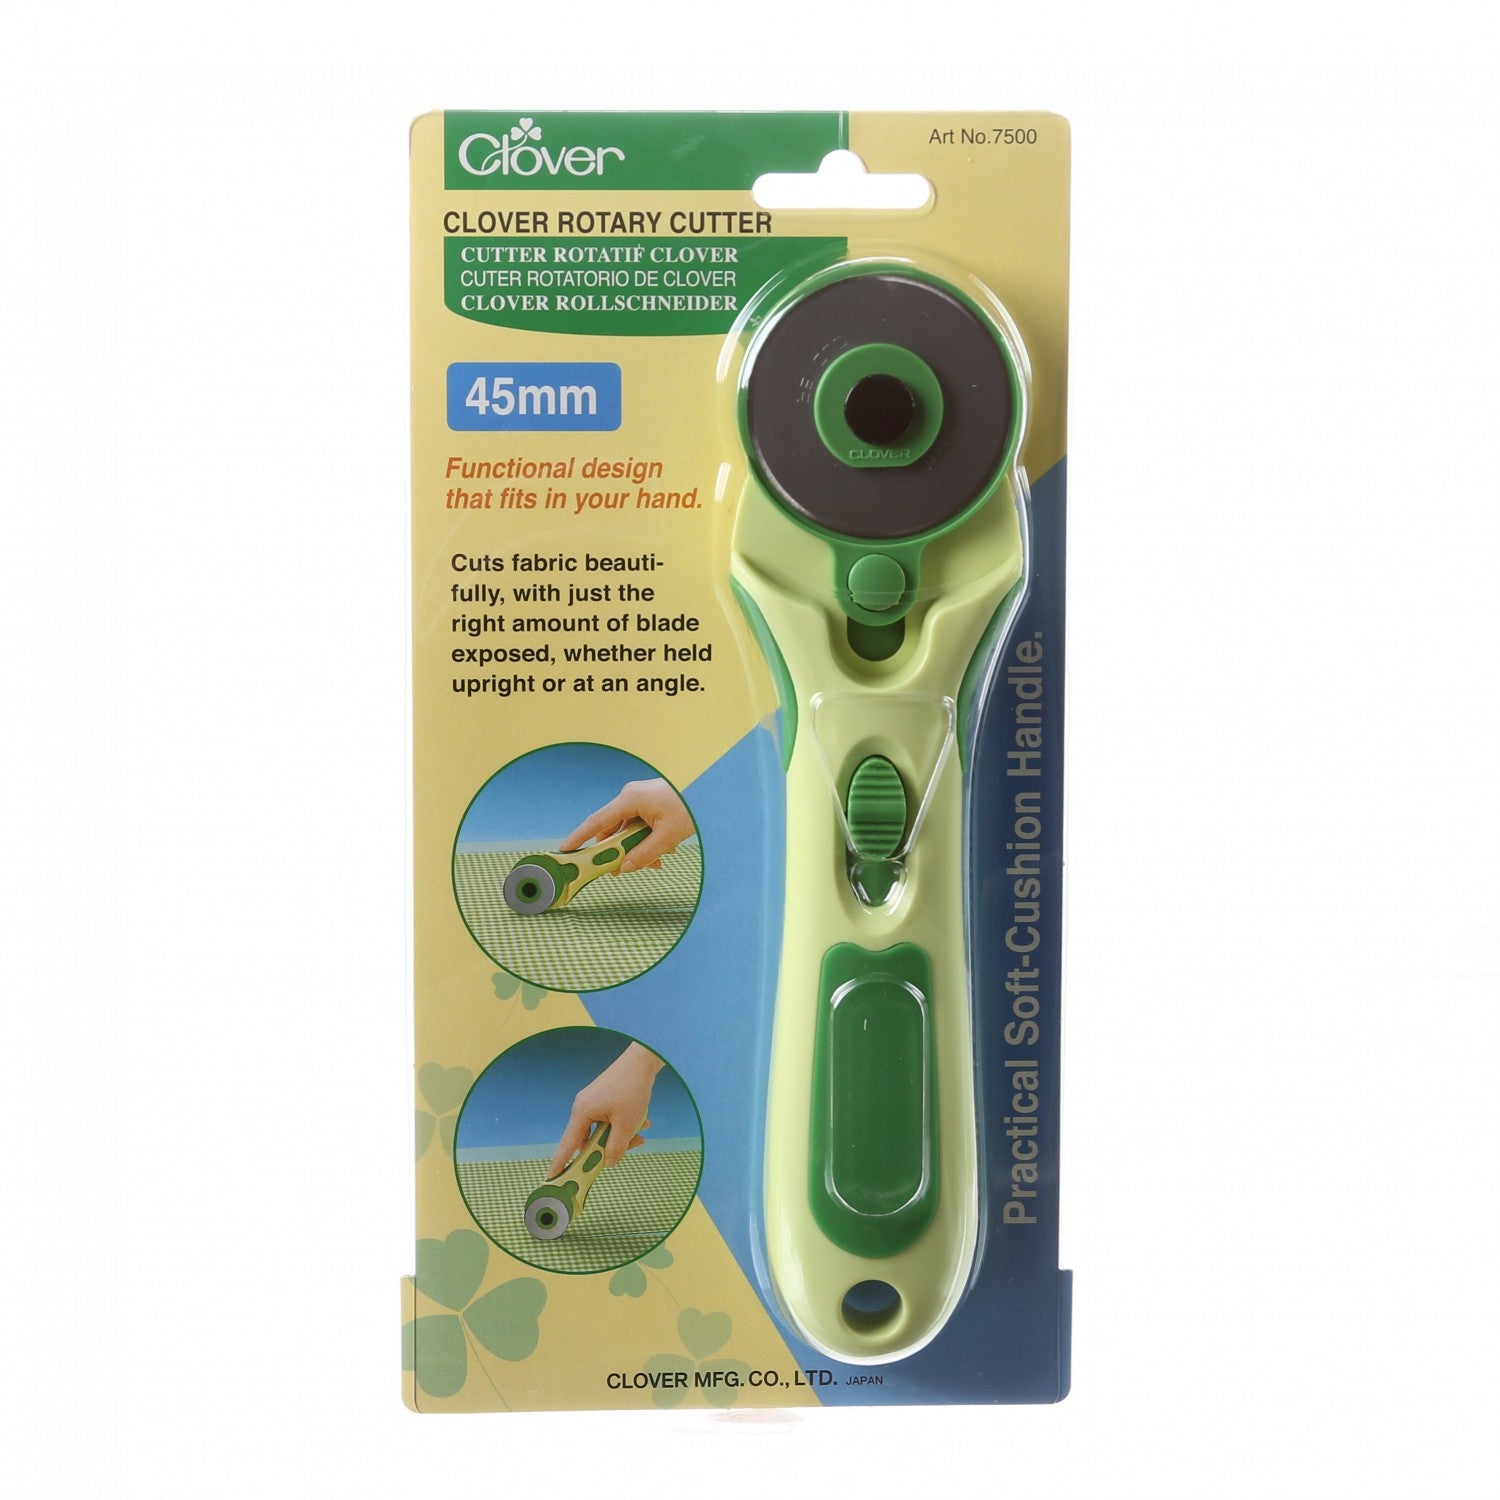 Rotary Cutter, Scissors, and Accessories